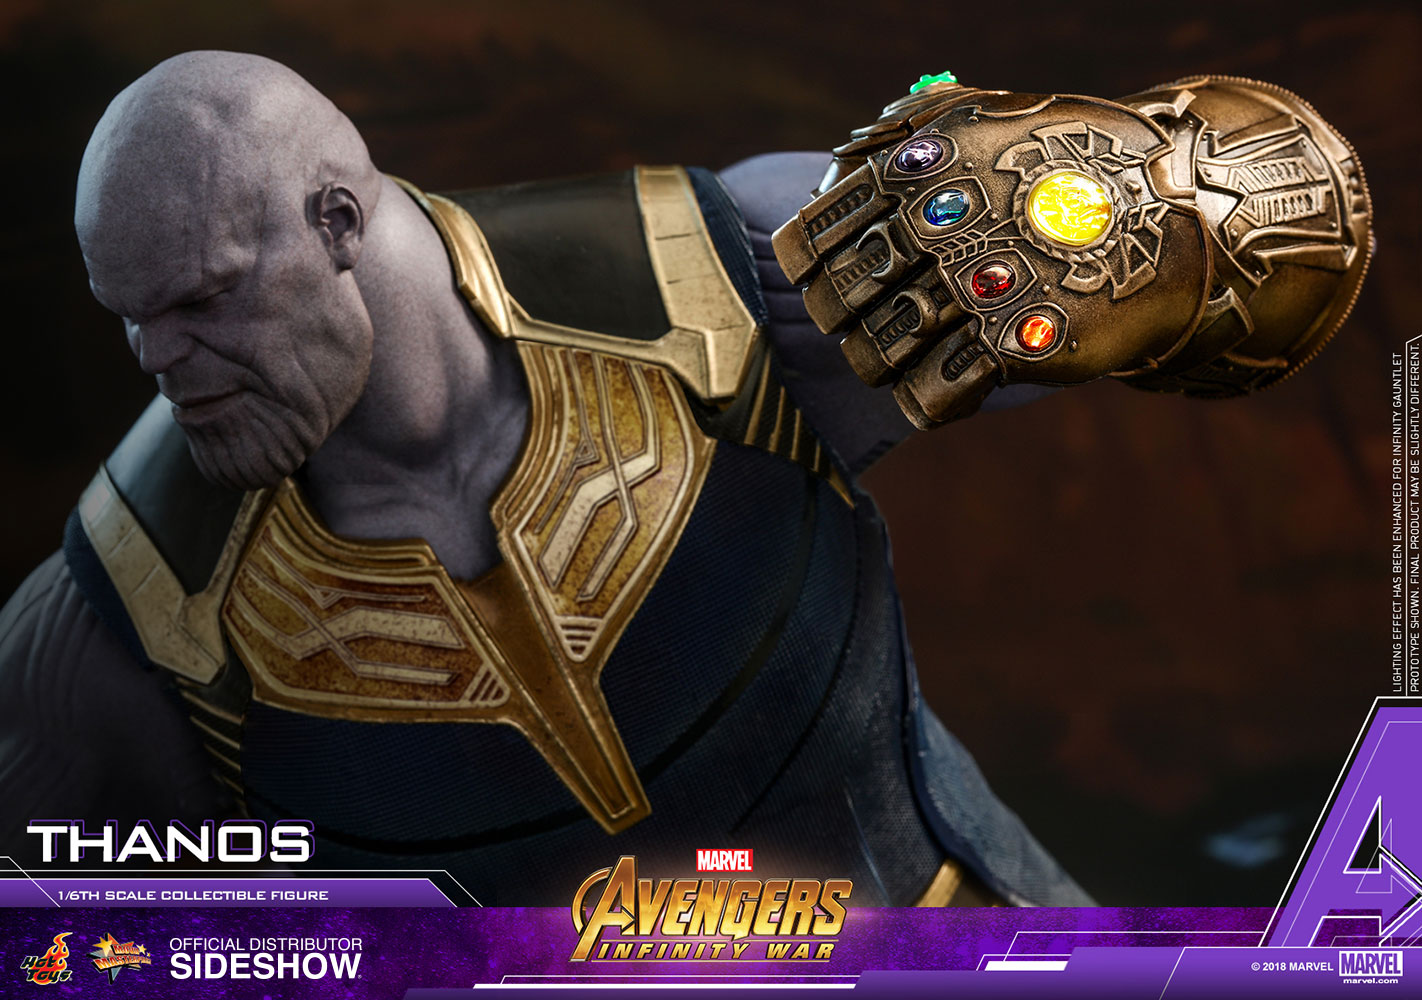 marvel-avengers-infinity-war-thanos-sixth-scale-figure-hot-toys-903429-14